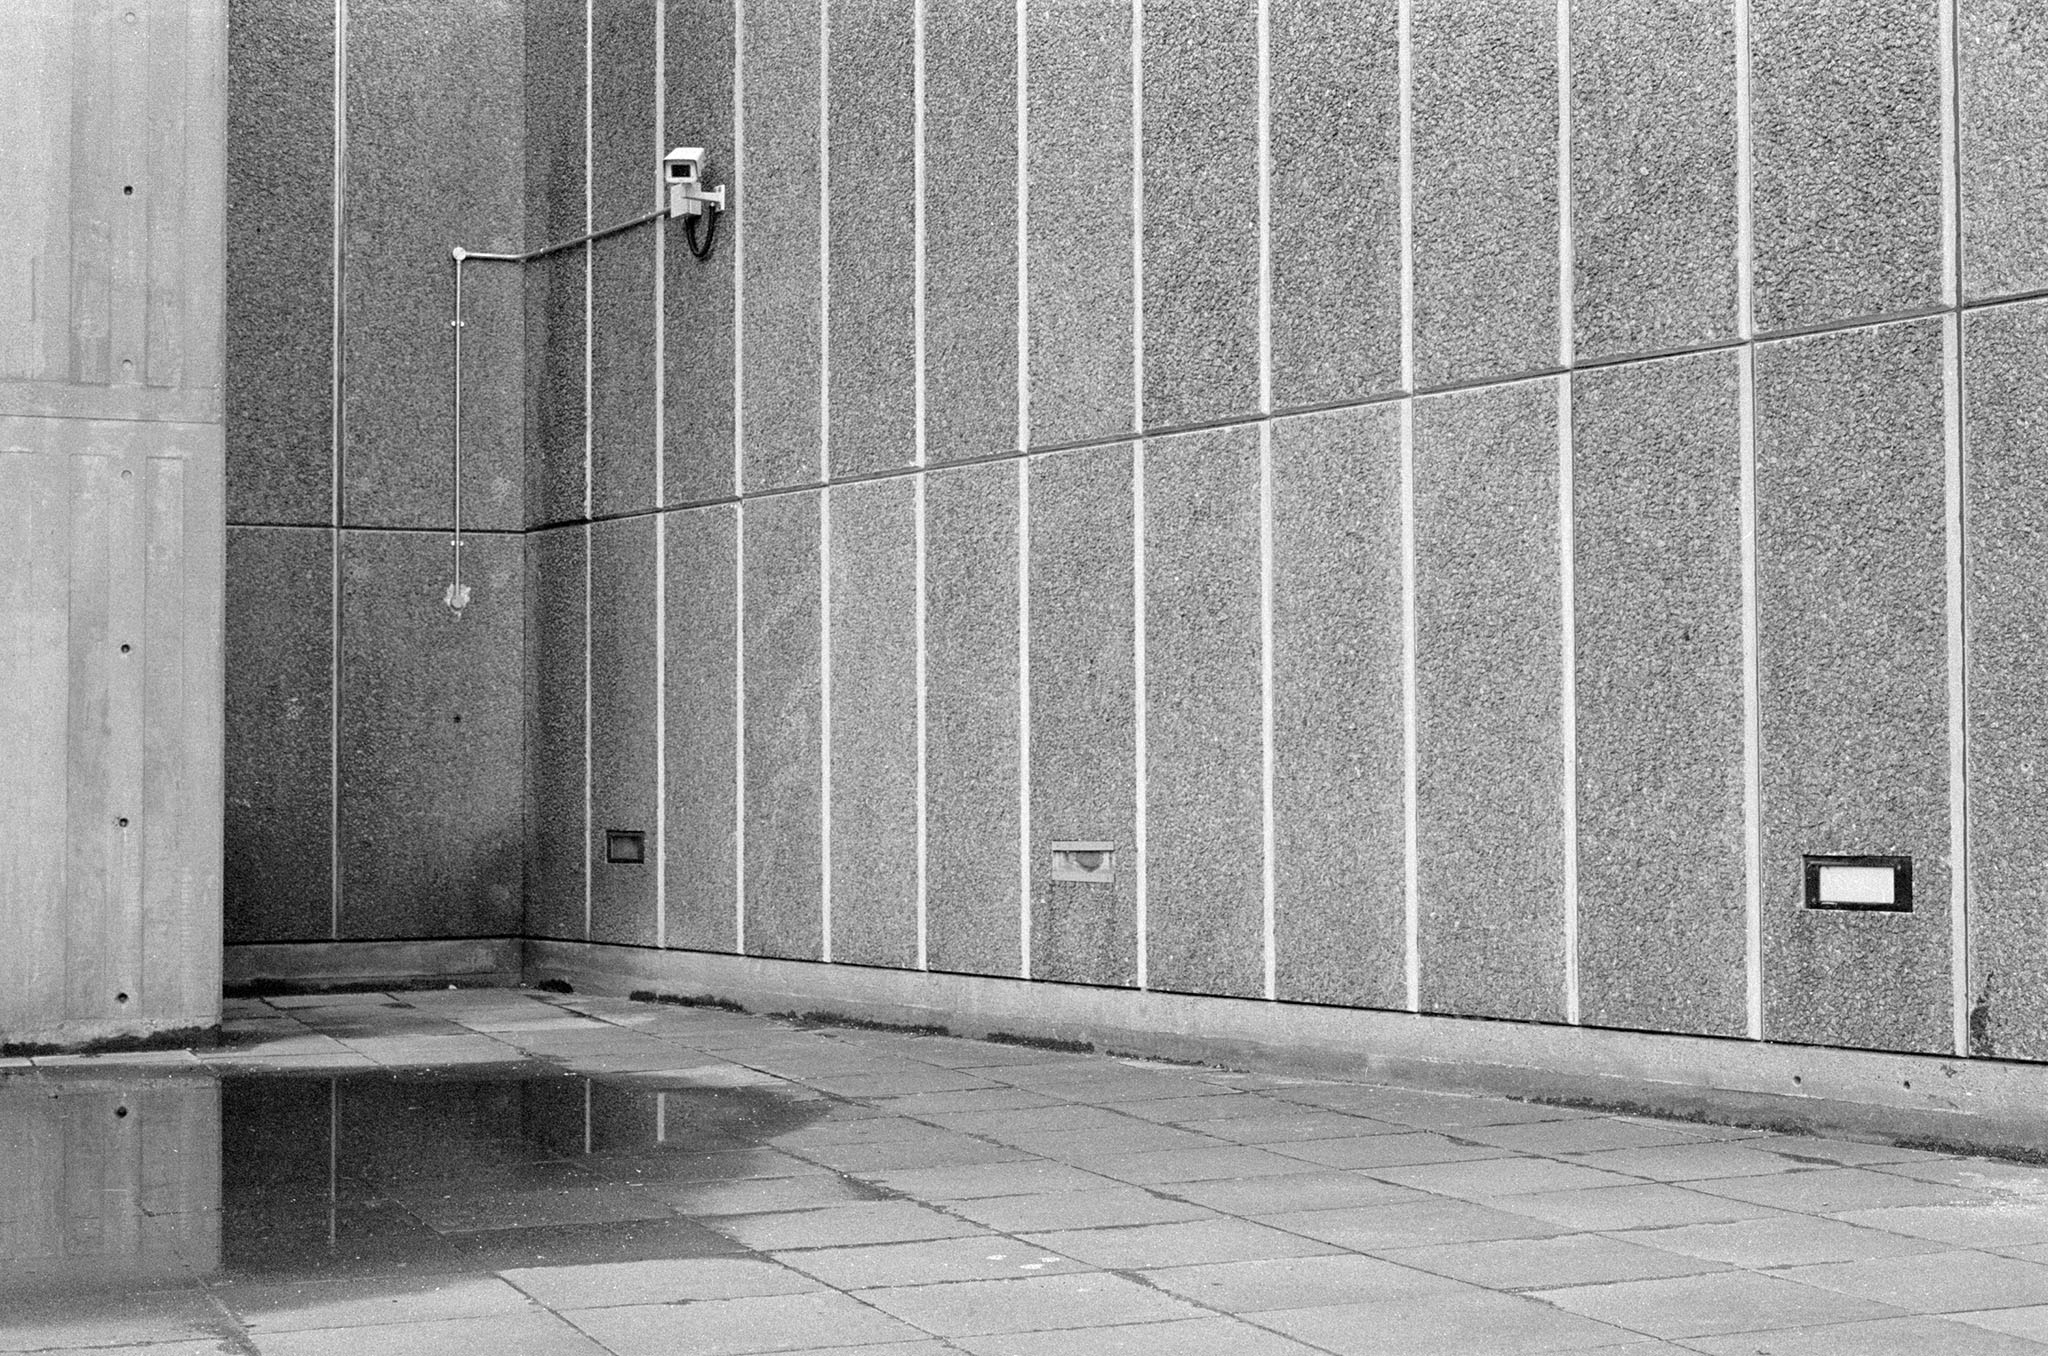 Ilford HP5 Plus 400 Example Image